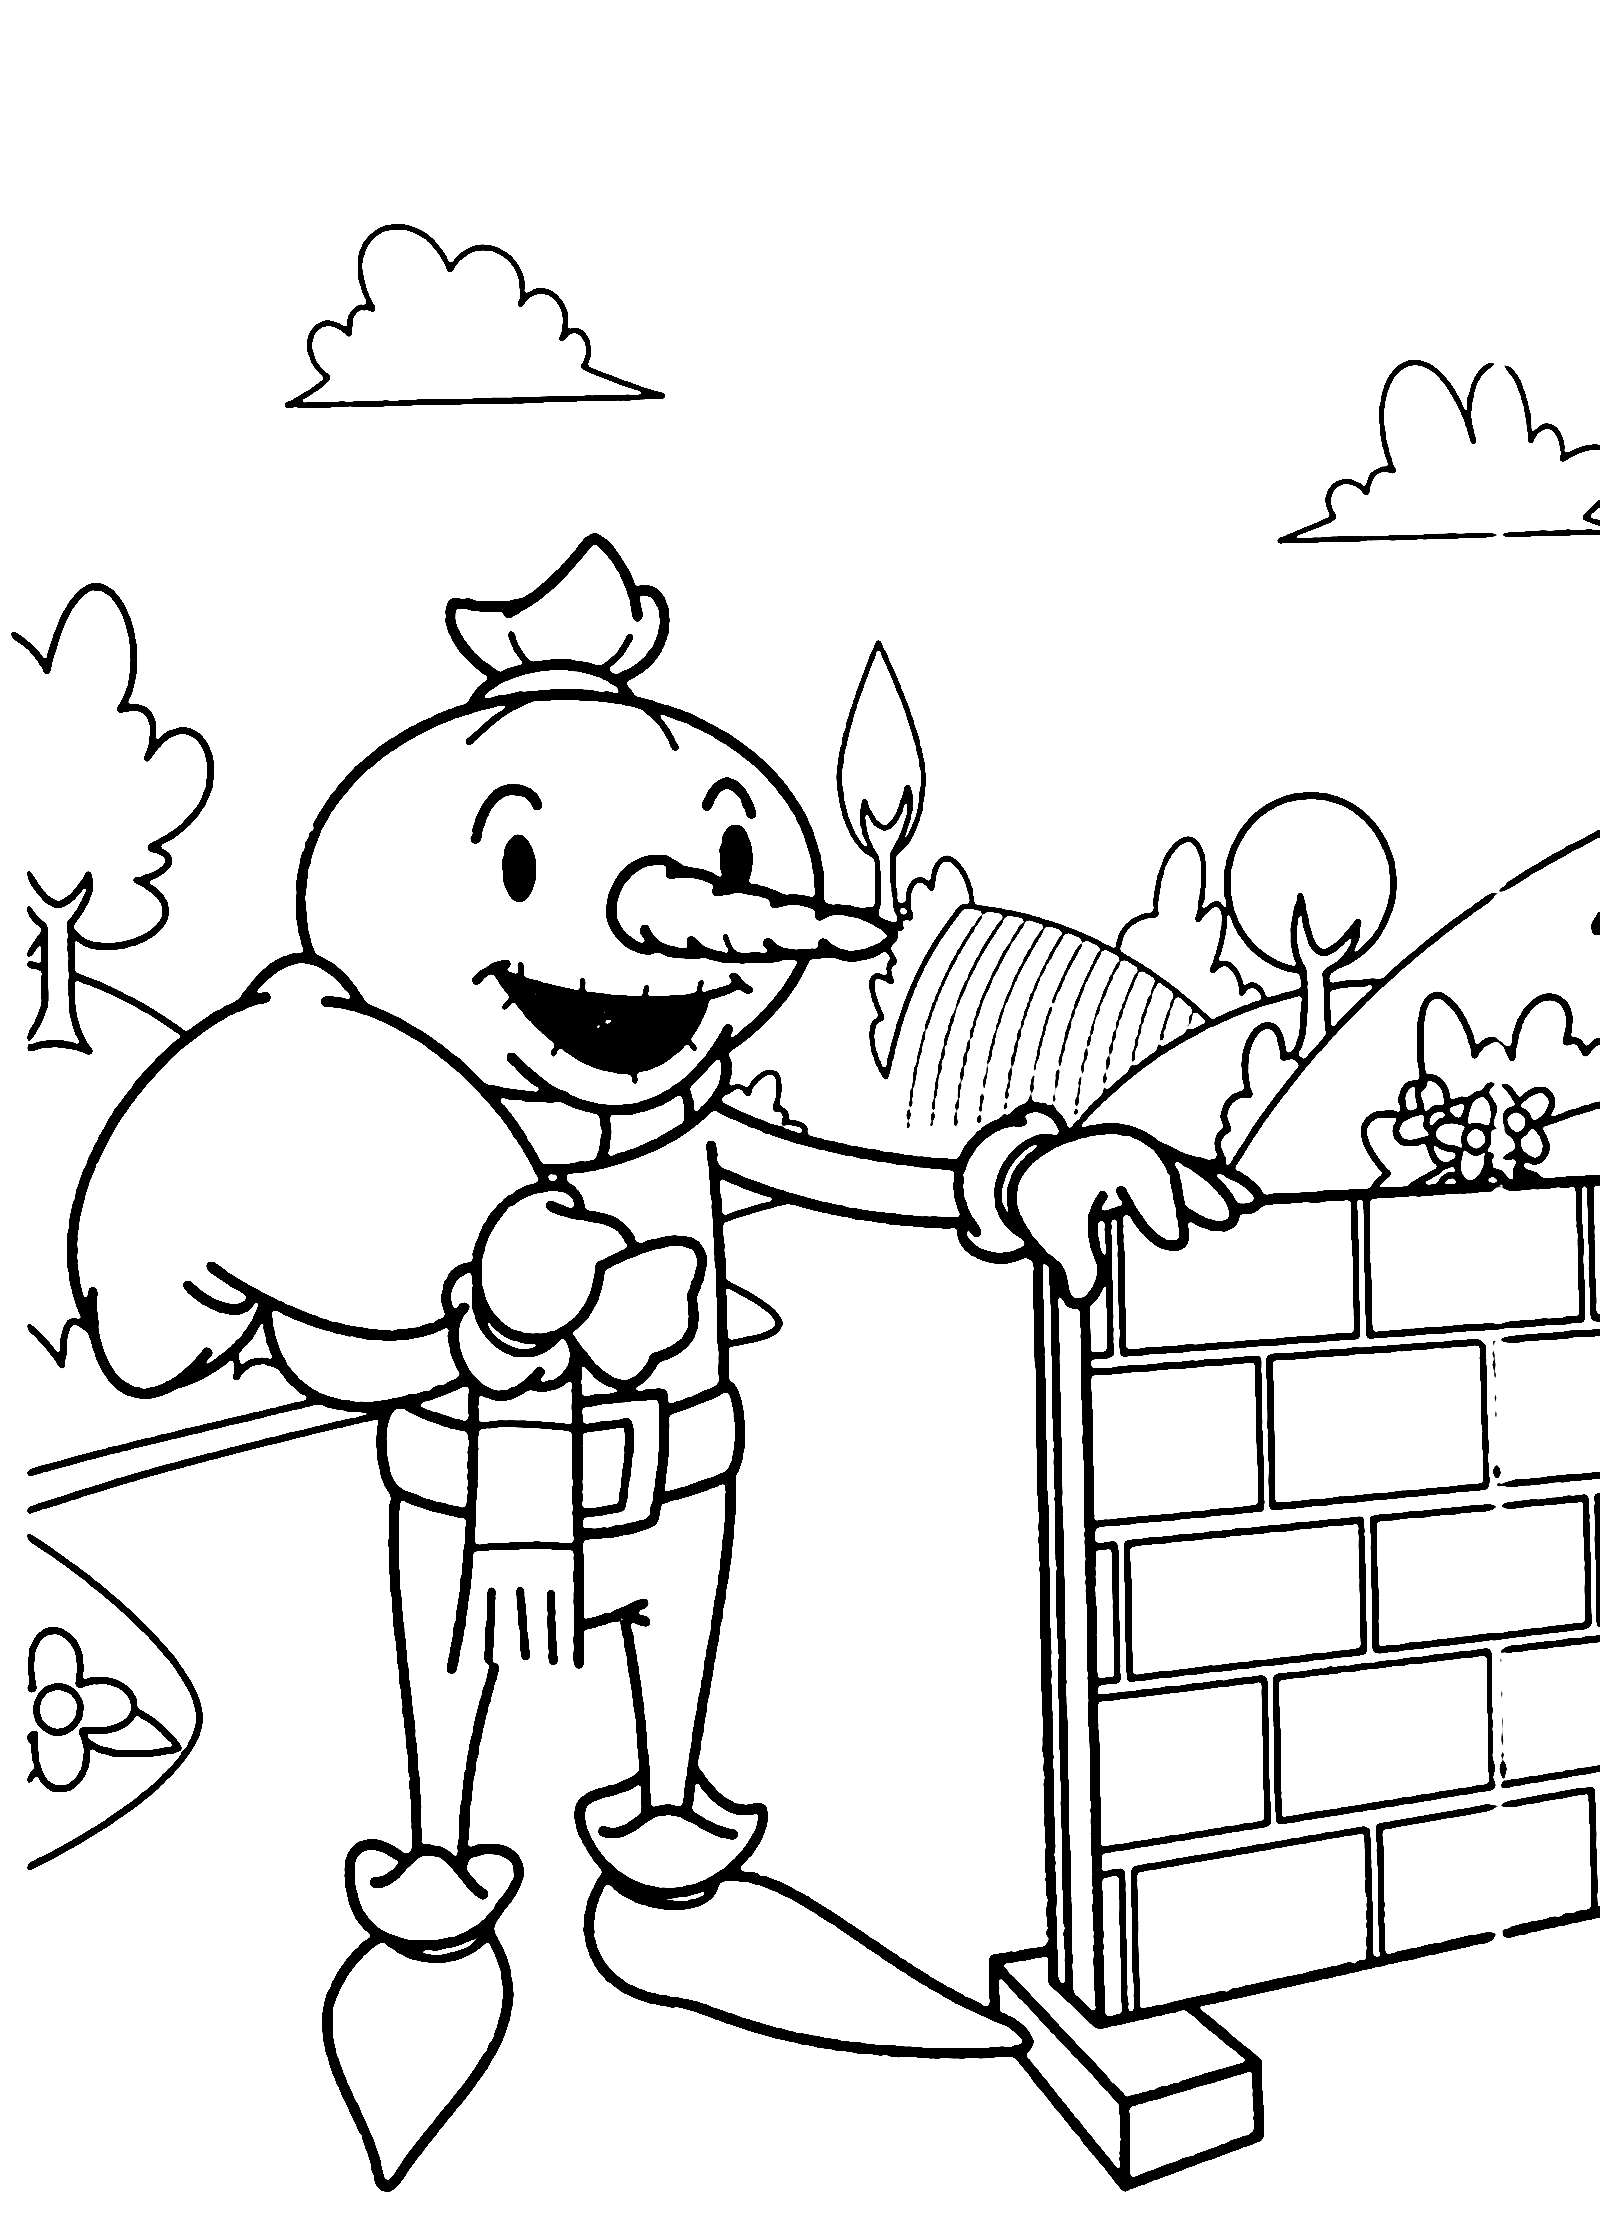 Bob the Builder Funny Scarecrow Coloring Page